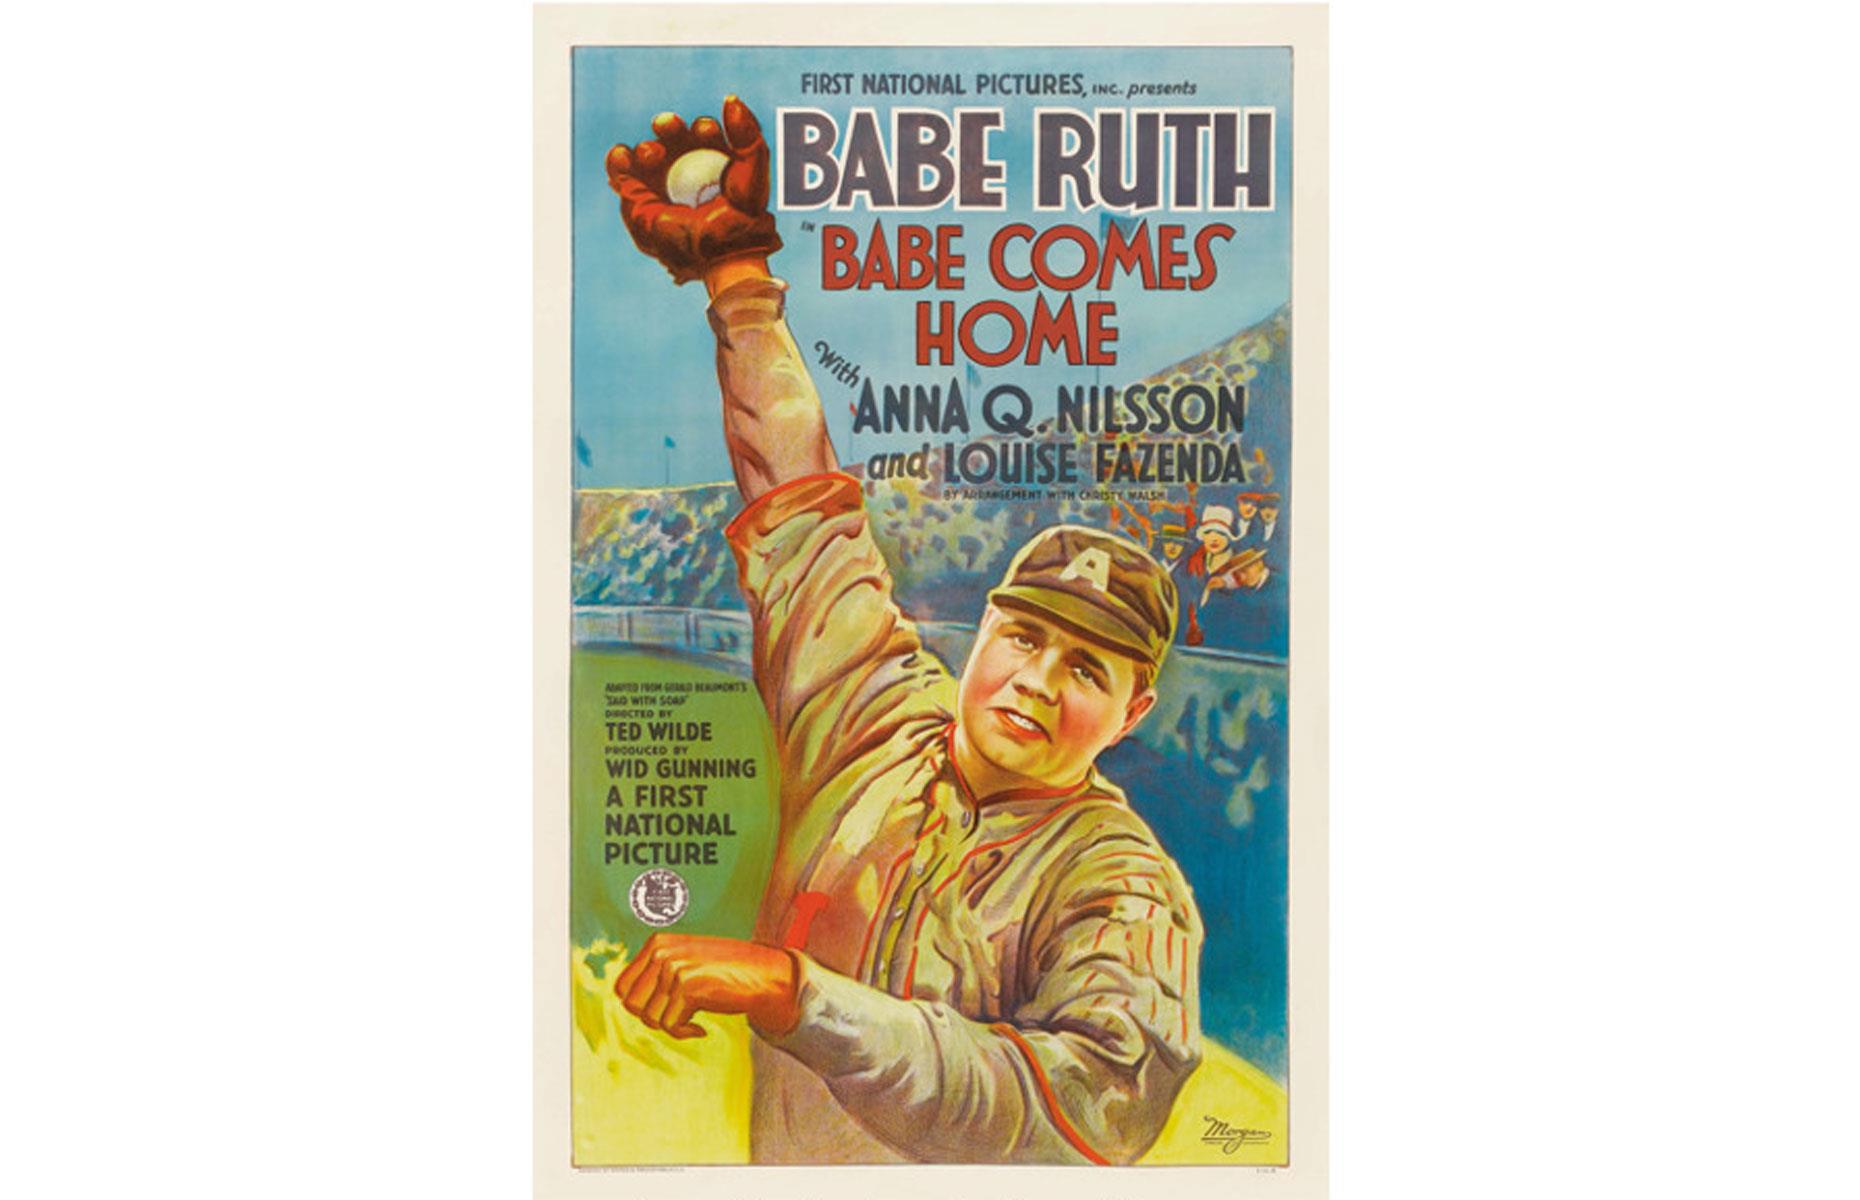 Babe Comes Home (American poster, 1927): $138,000 (£73.1k)